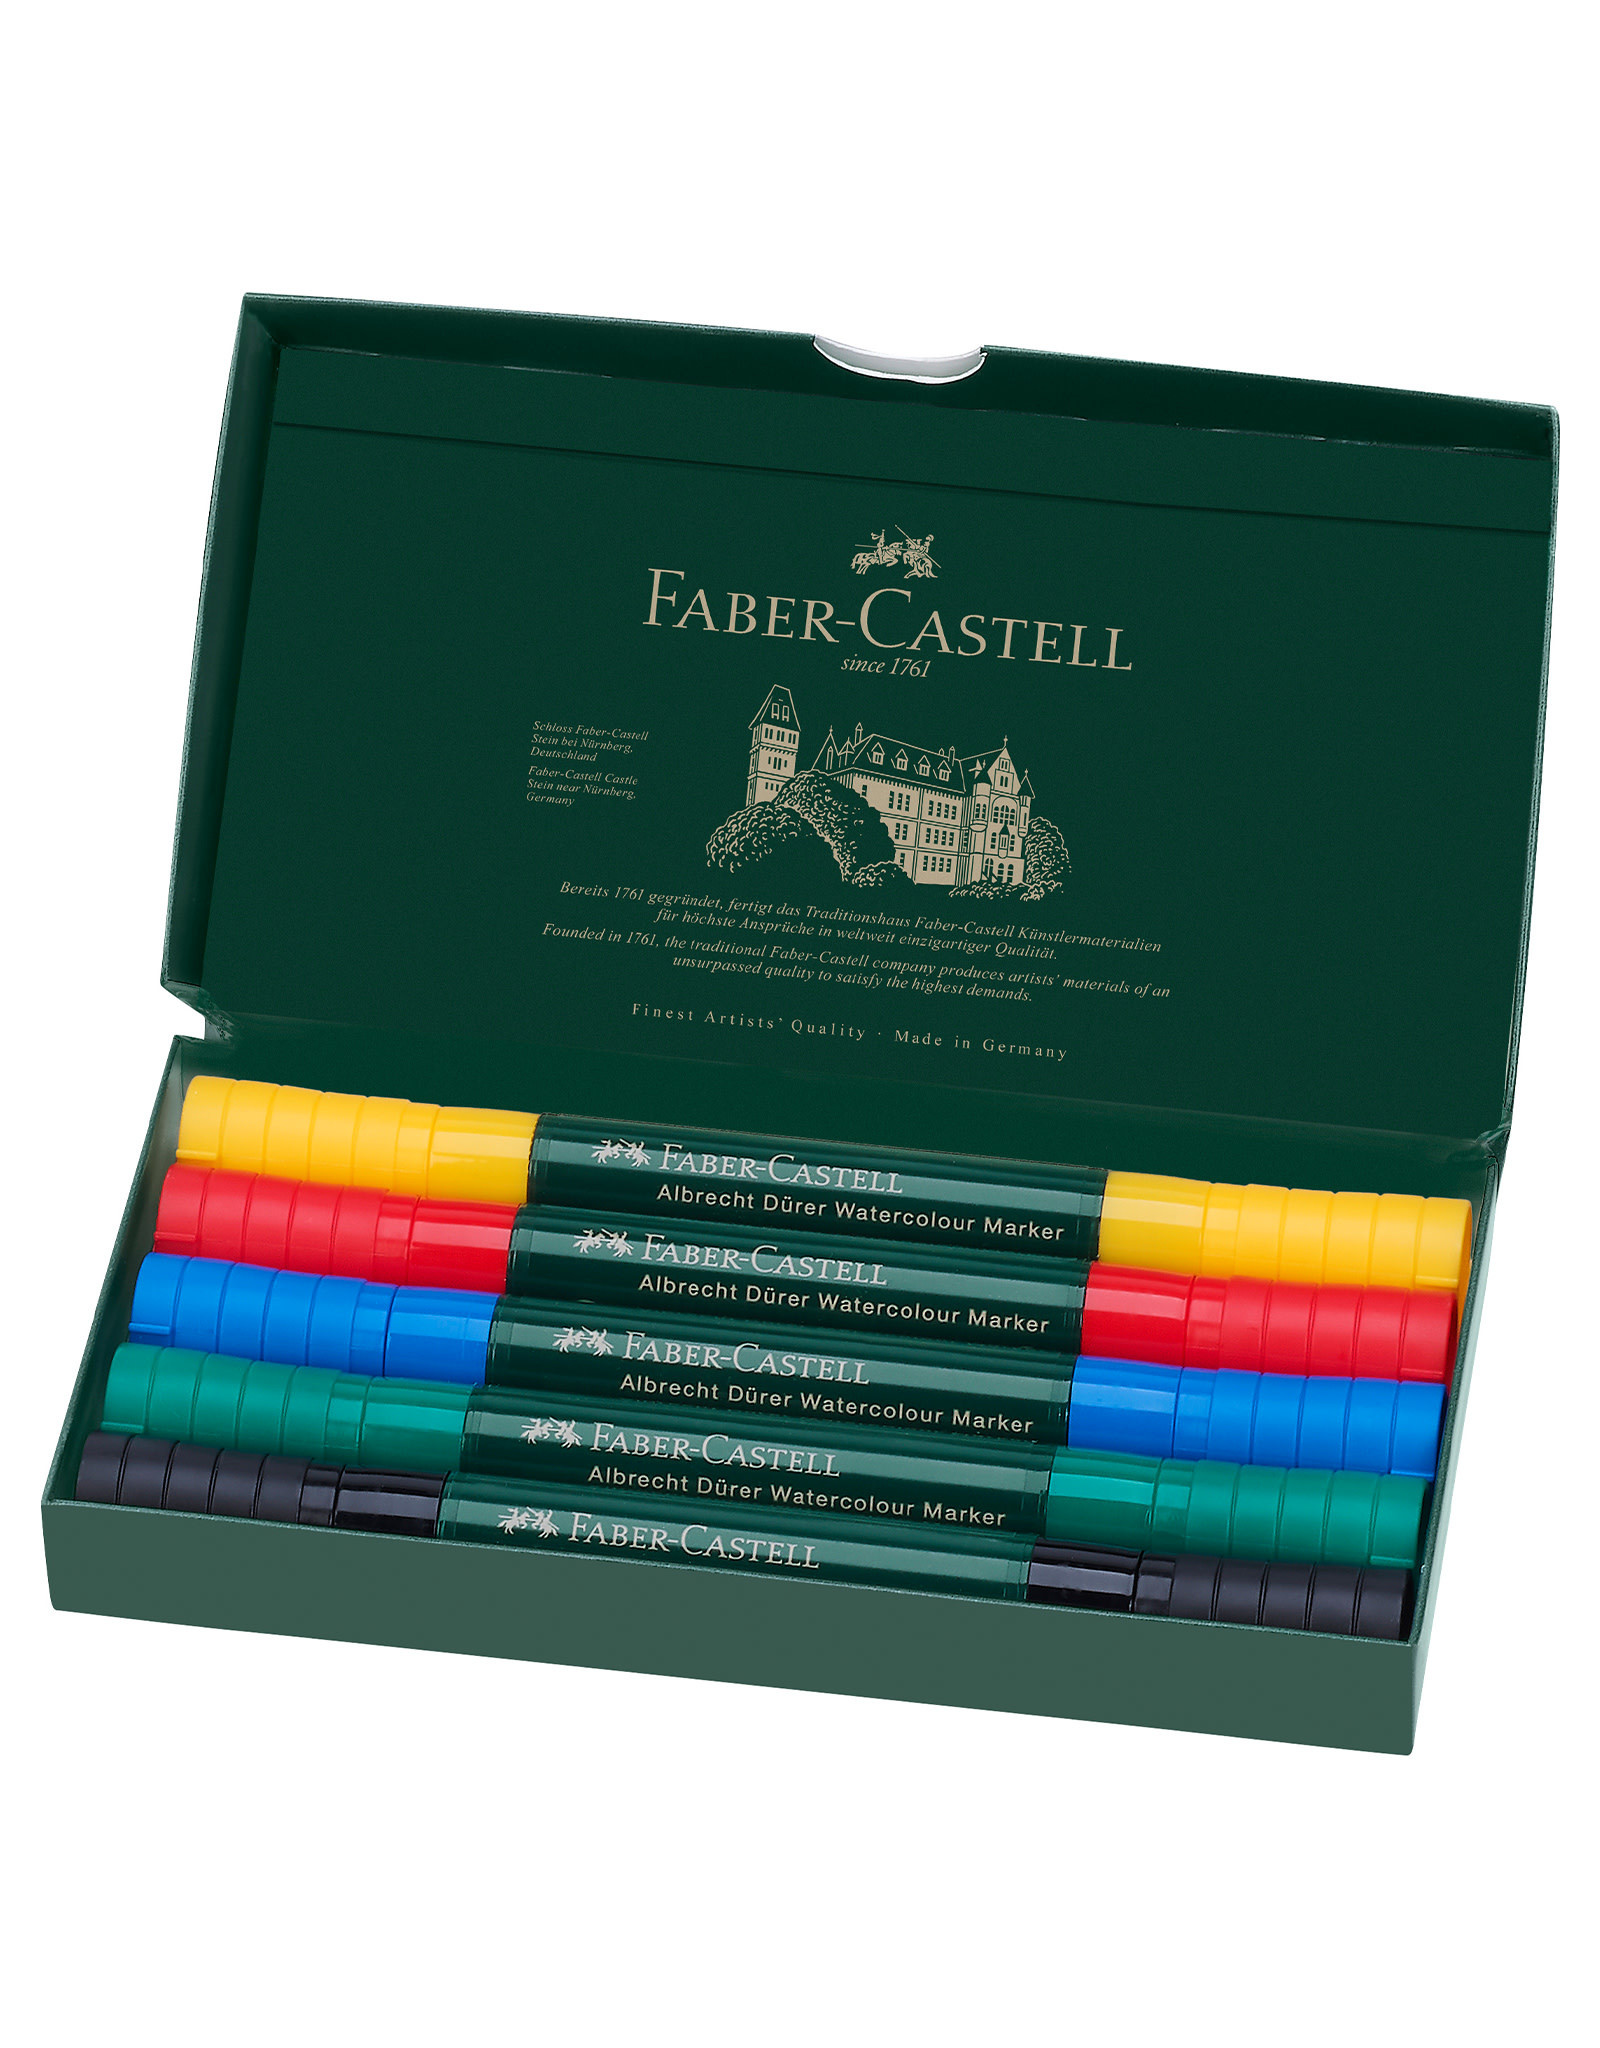 FABER-CASTELL Albrecht Durer Watercolor Markers, Gift Box of 5